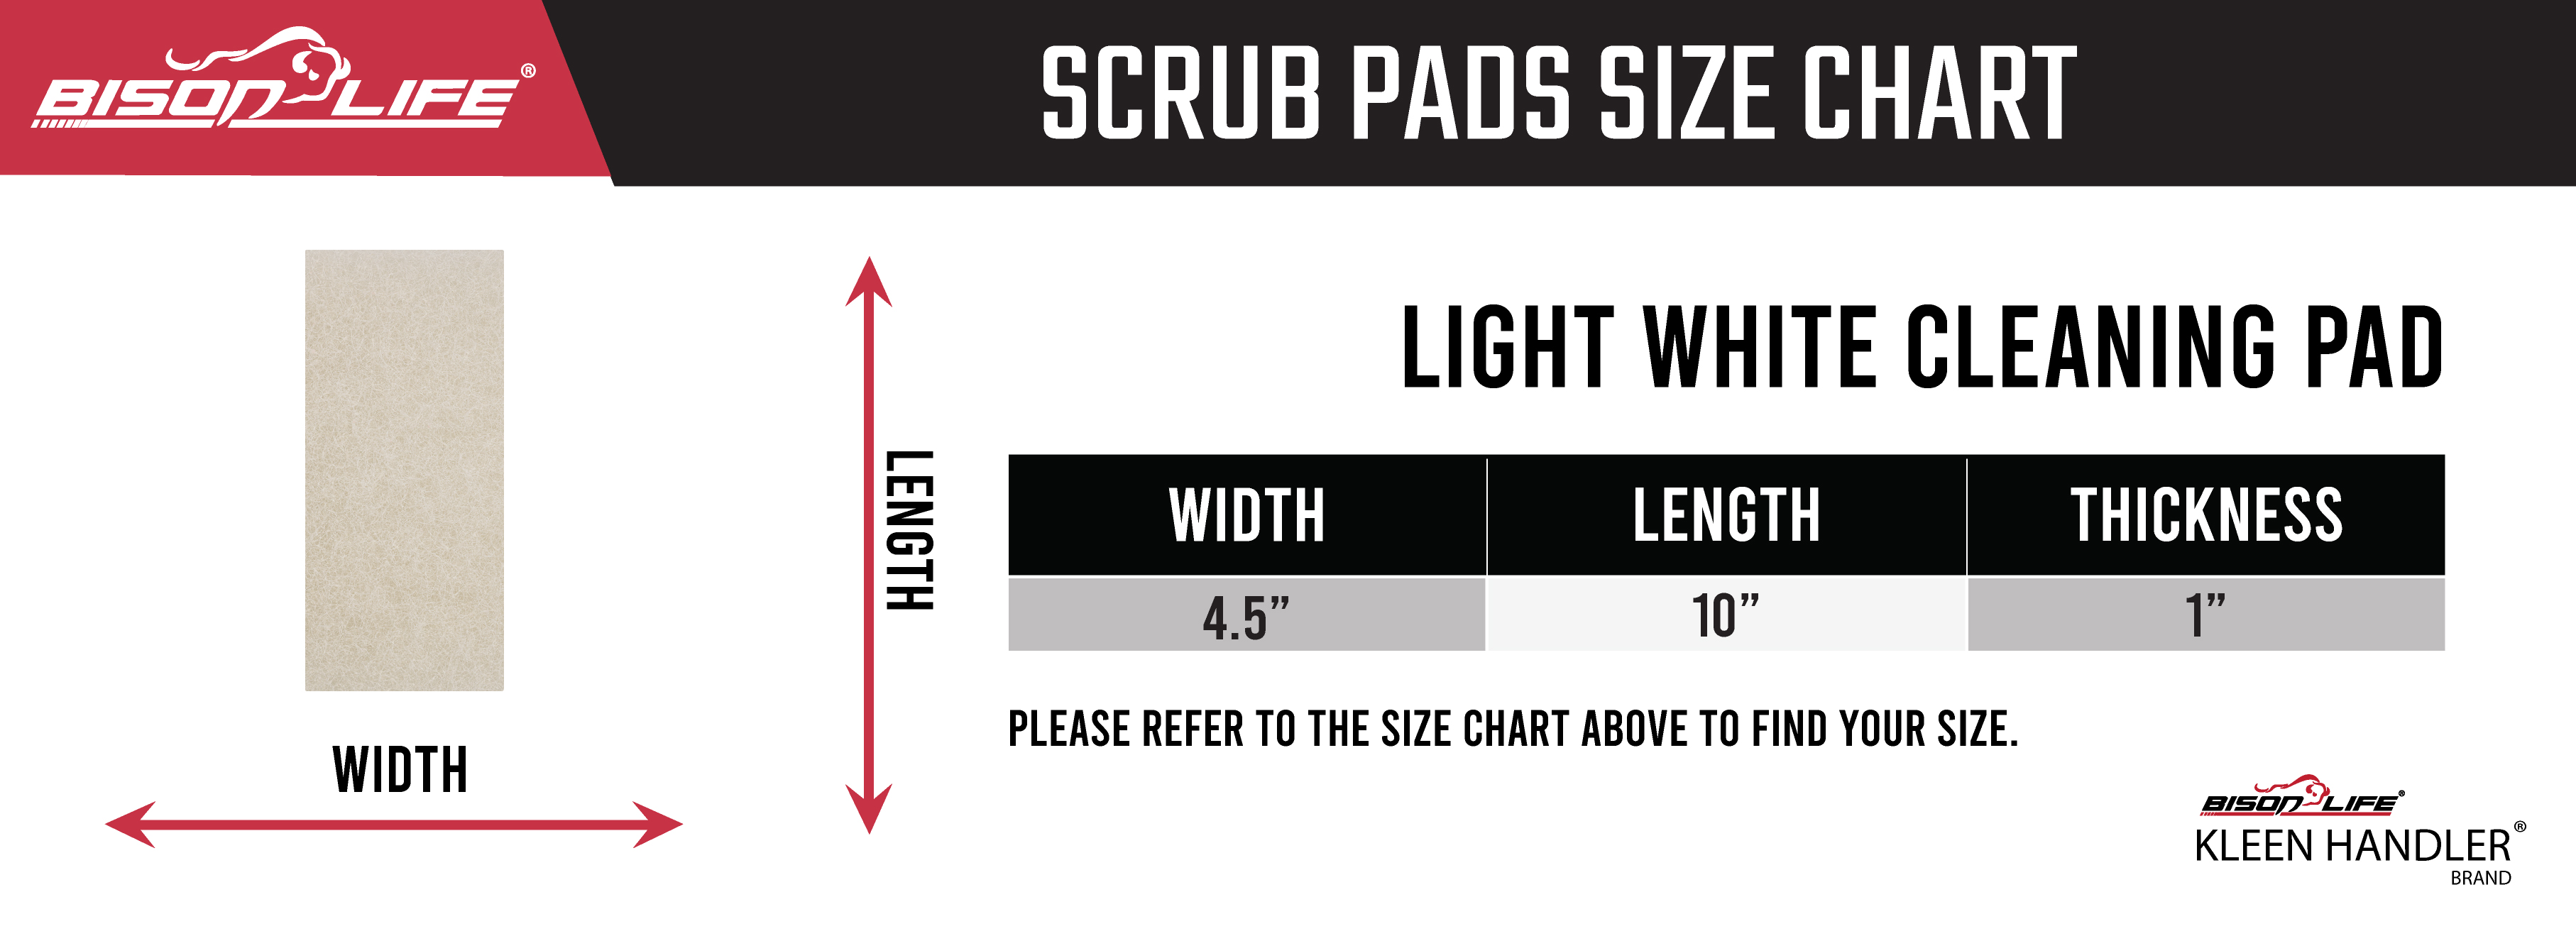 Light White Cleaning Pad Size Chart